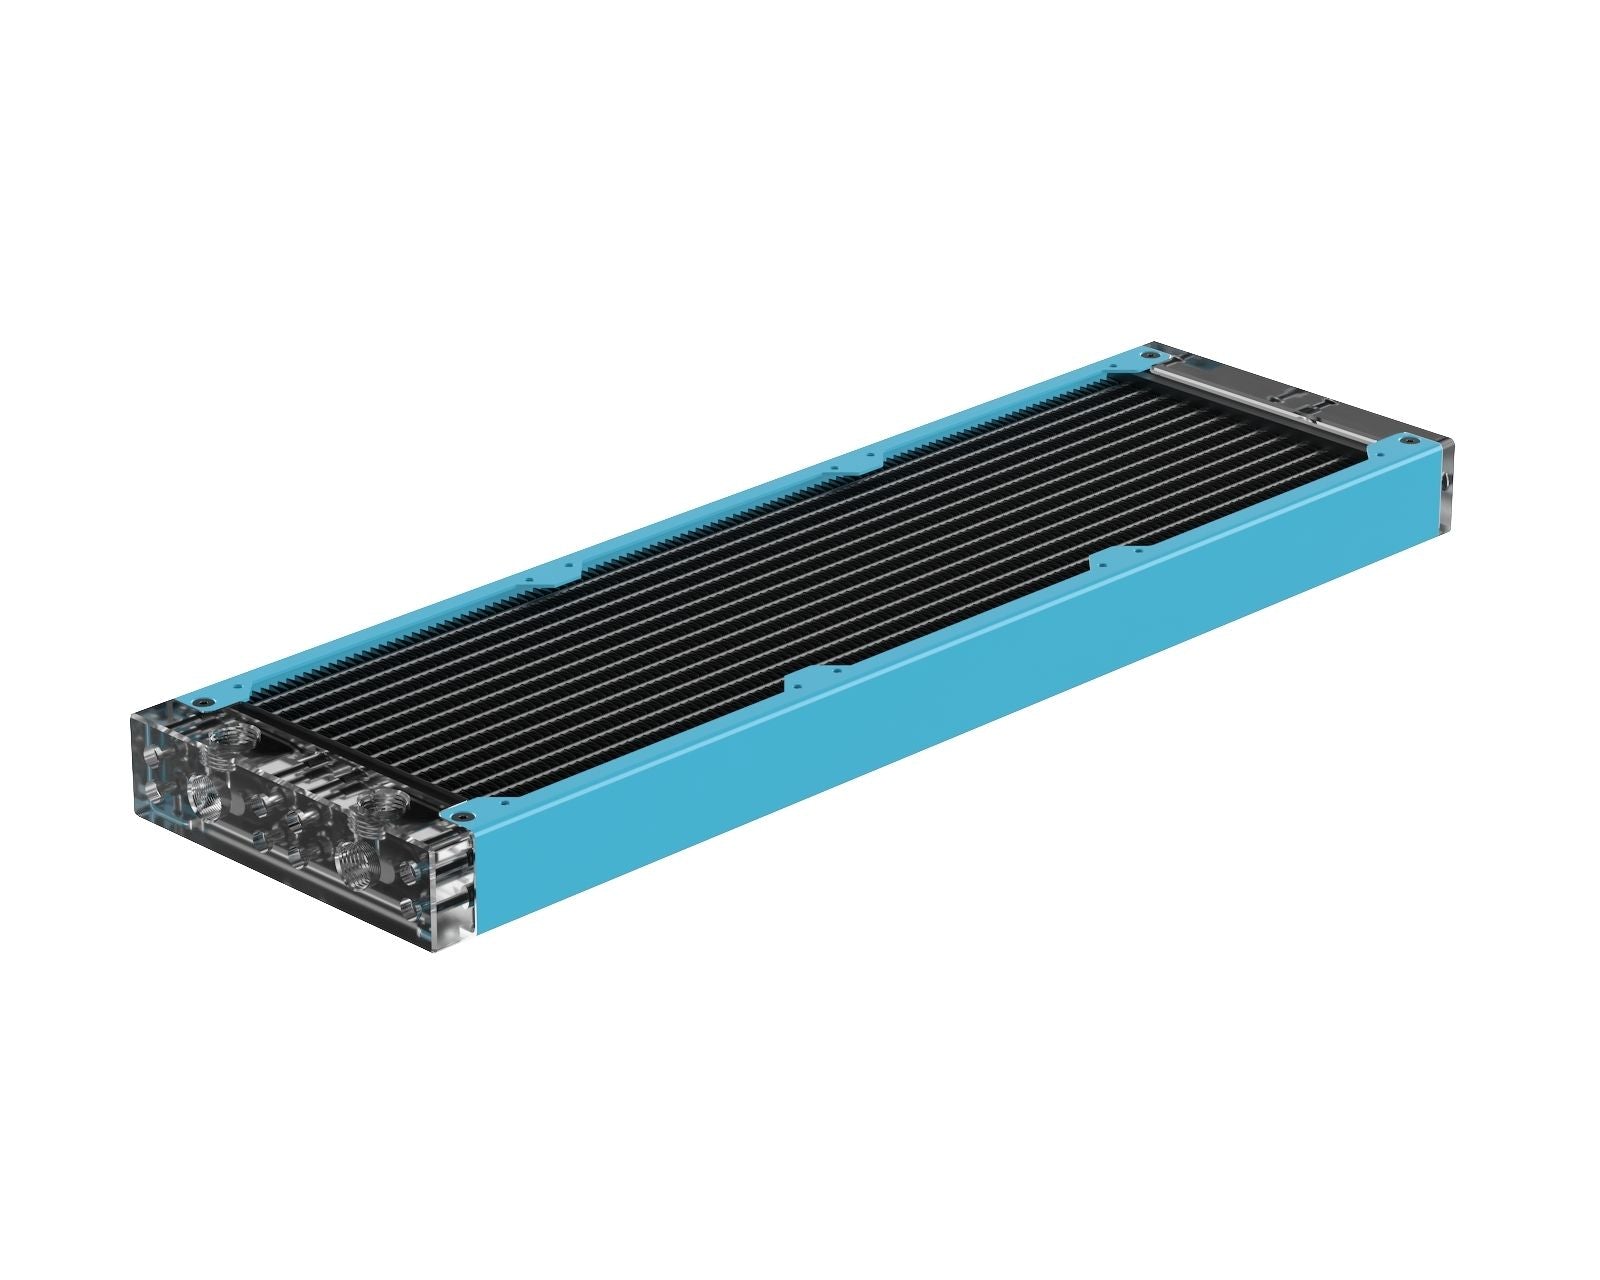 PrimoChill 360SL (30mm) EXIMO Modular Radiator, Clear Acrylic, 3x120mm, Triple Fan (R-SL-A36) Available in 20+ Colors, Assembled in USA and Custom Watercooling Loop Ready - Sky Blue